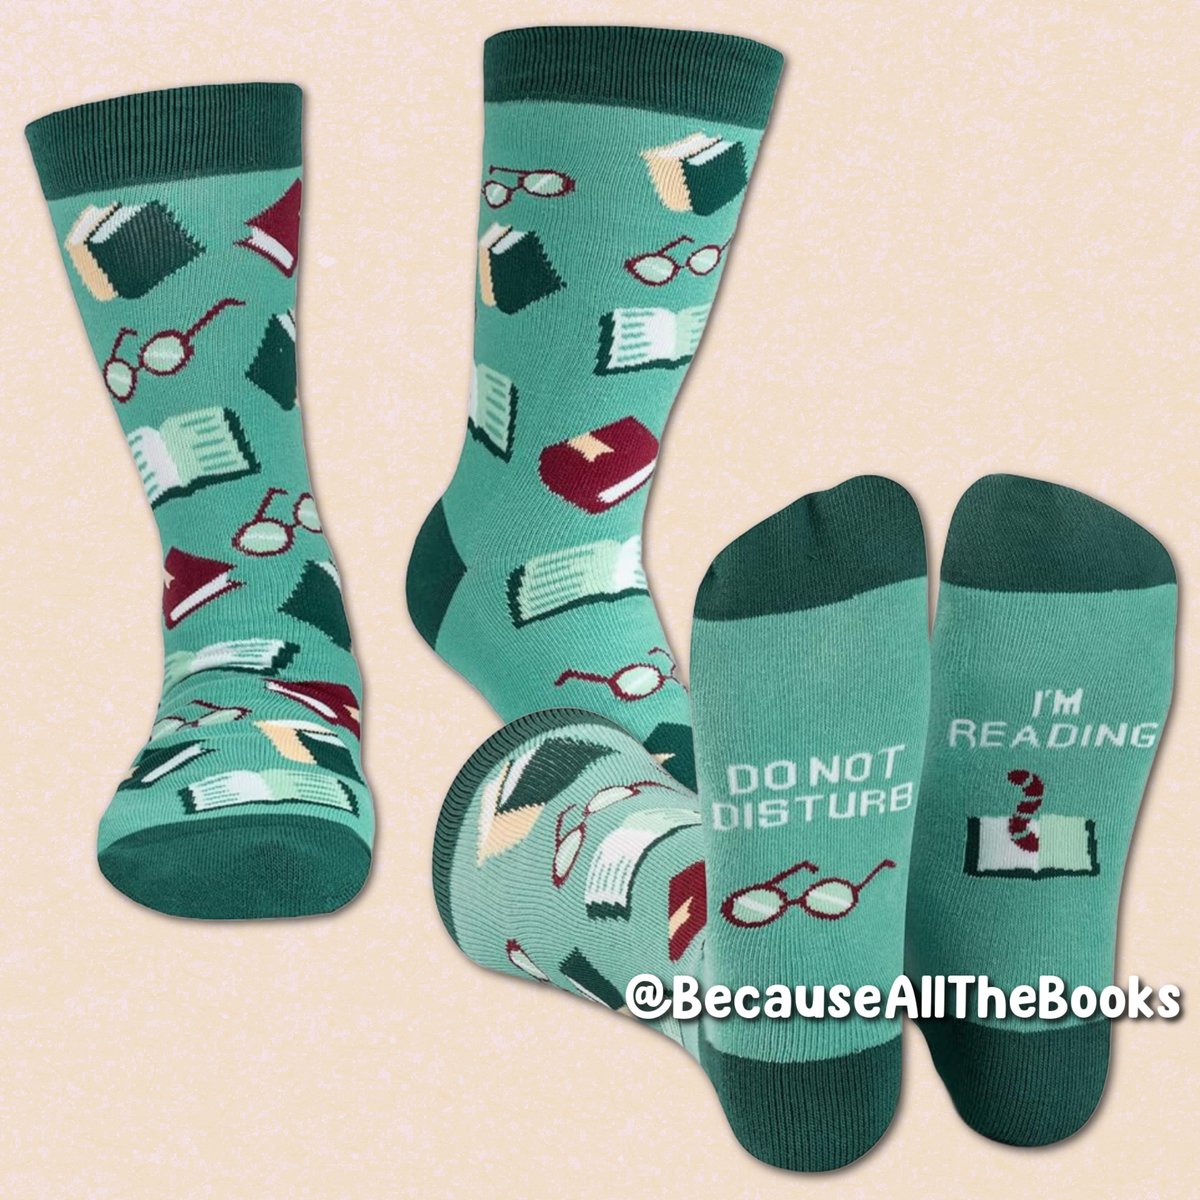 I bet you could rock these socks...and I KNOW I could! 

🧦📖  amzn.to/4beu4jl

#BecauseAllTheBooks #FunSocks #HappySocks #BookFun